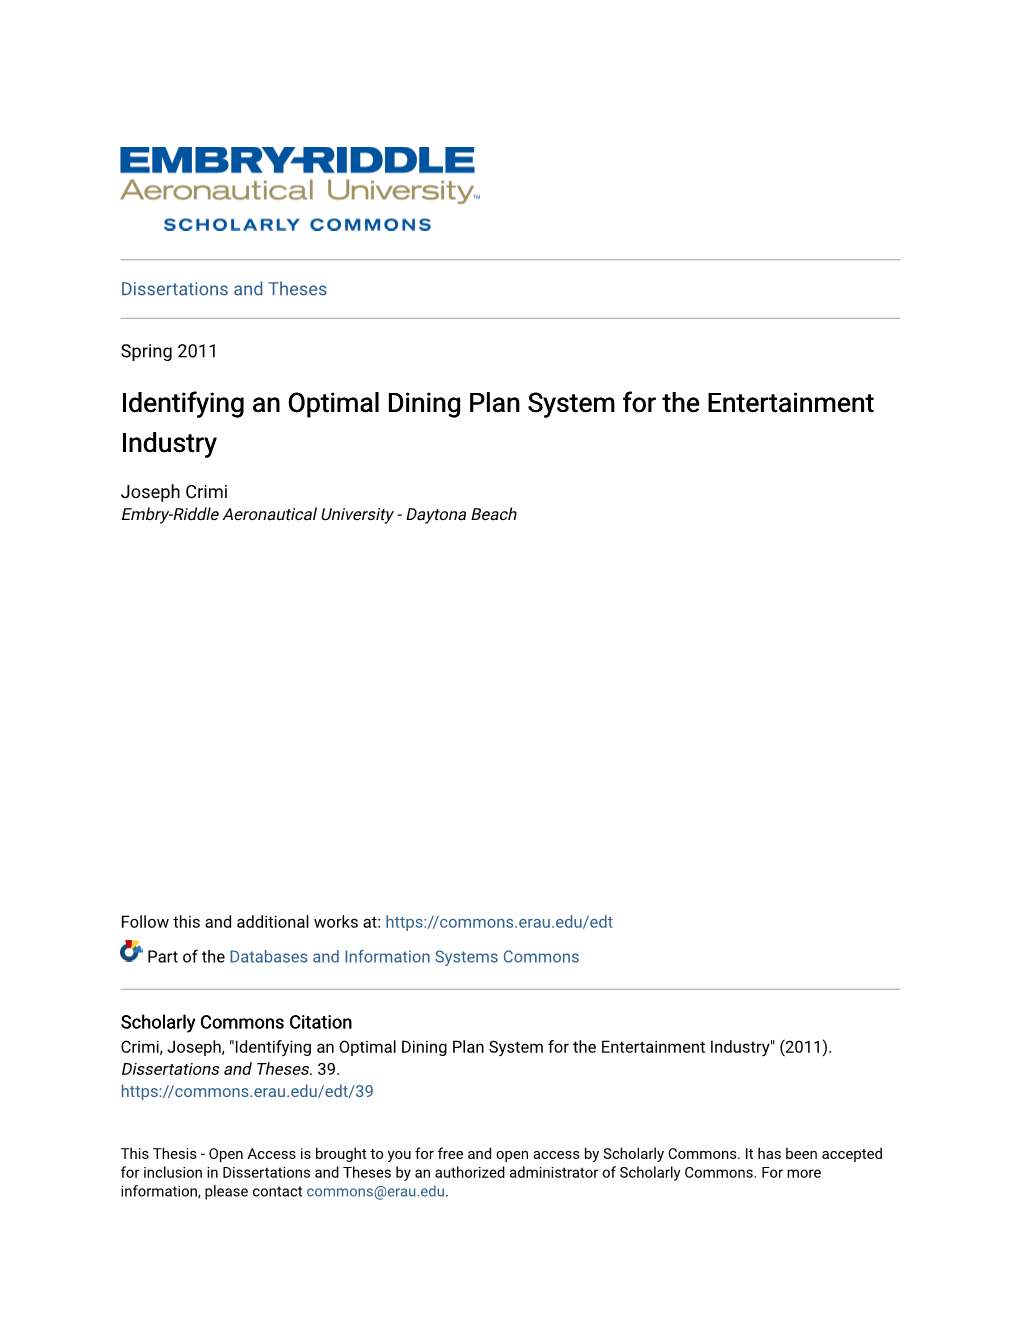 Identifying an Optimal Dining Plan System for the Entertainment Industry